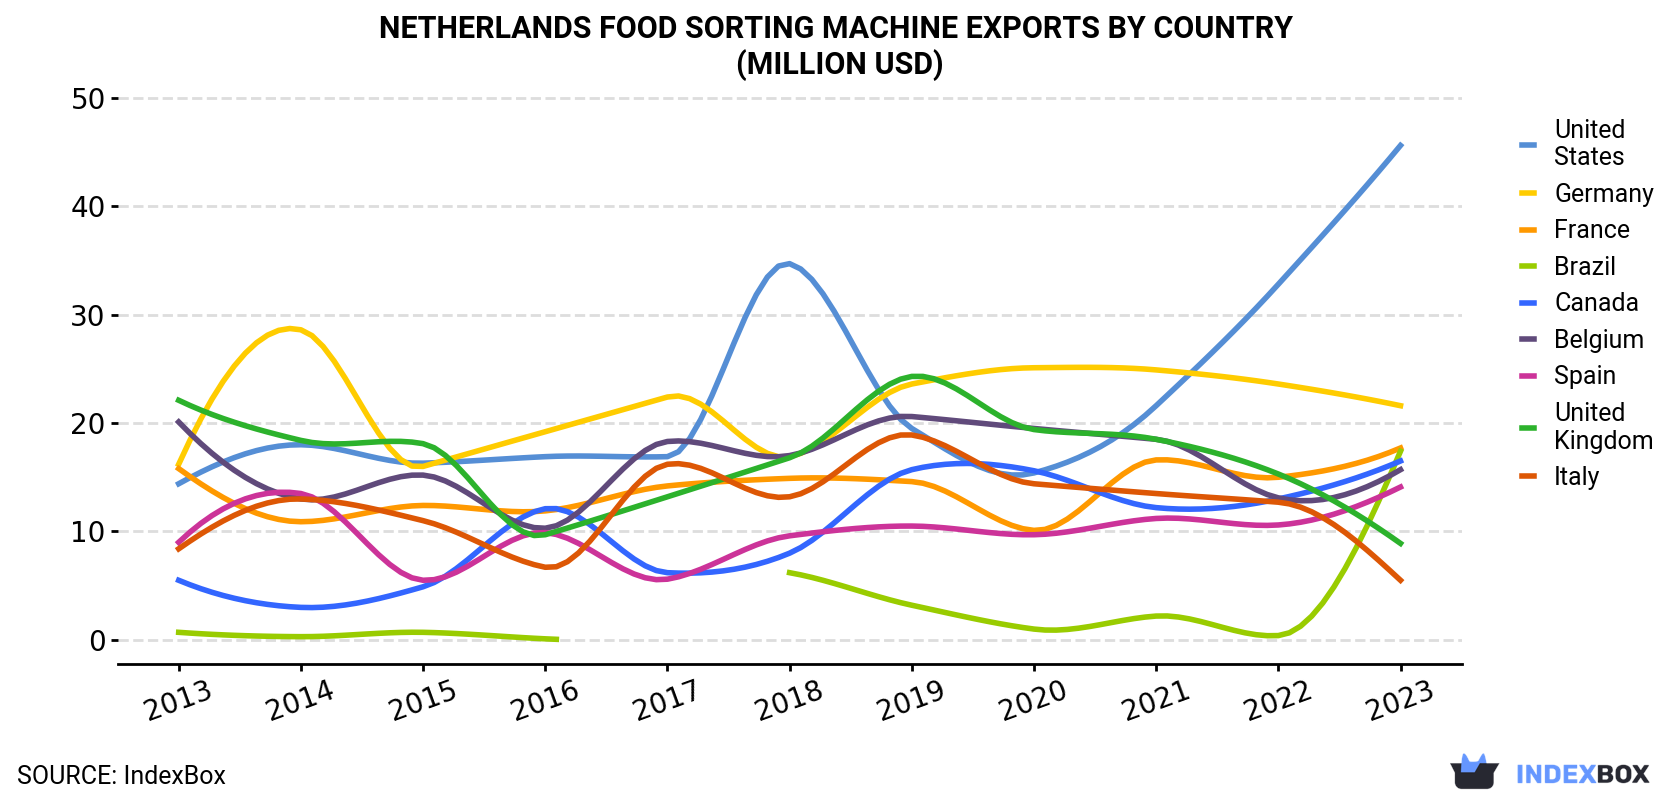 Netherlands Food Sorting Machine Exports By Country (Million USD)